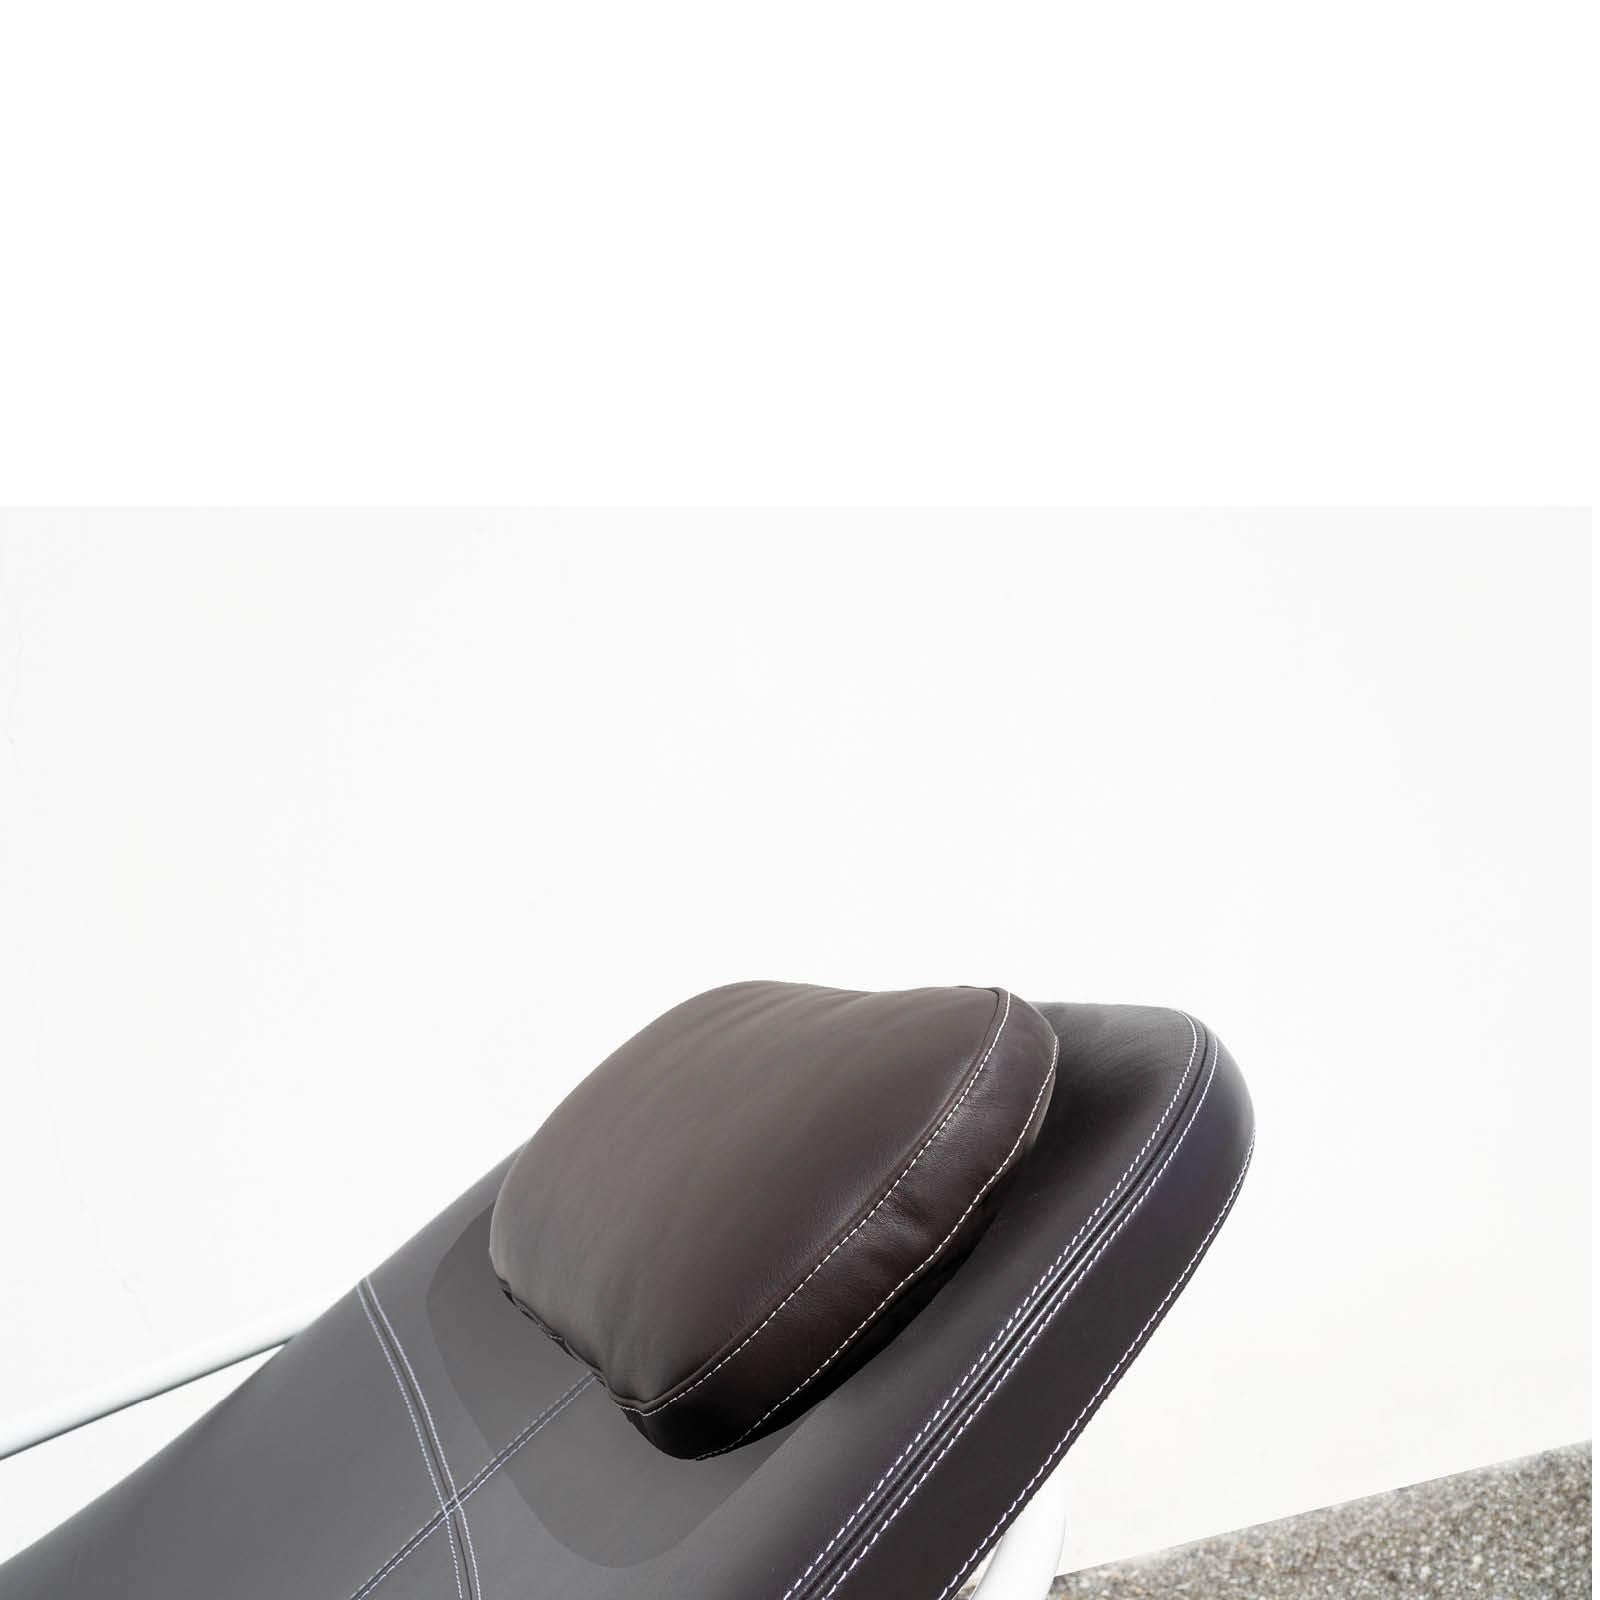 WIREFLOW  Chaise longue by Michel Rojkind for Driade For Sale 6